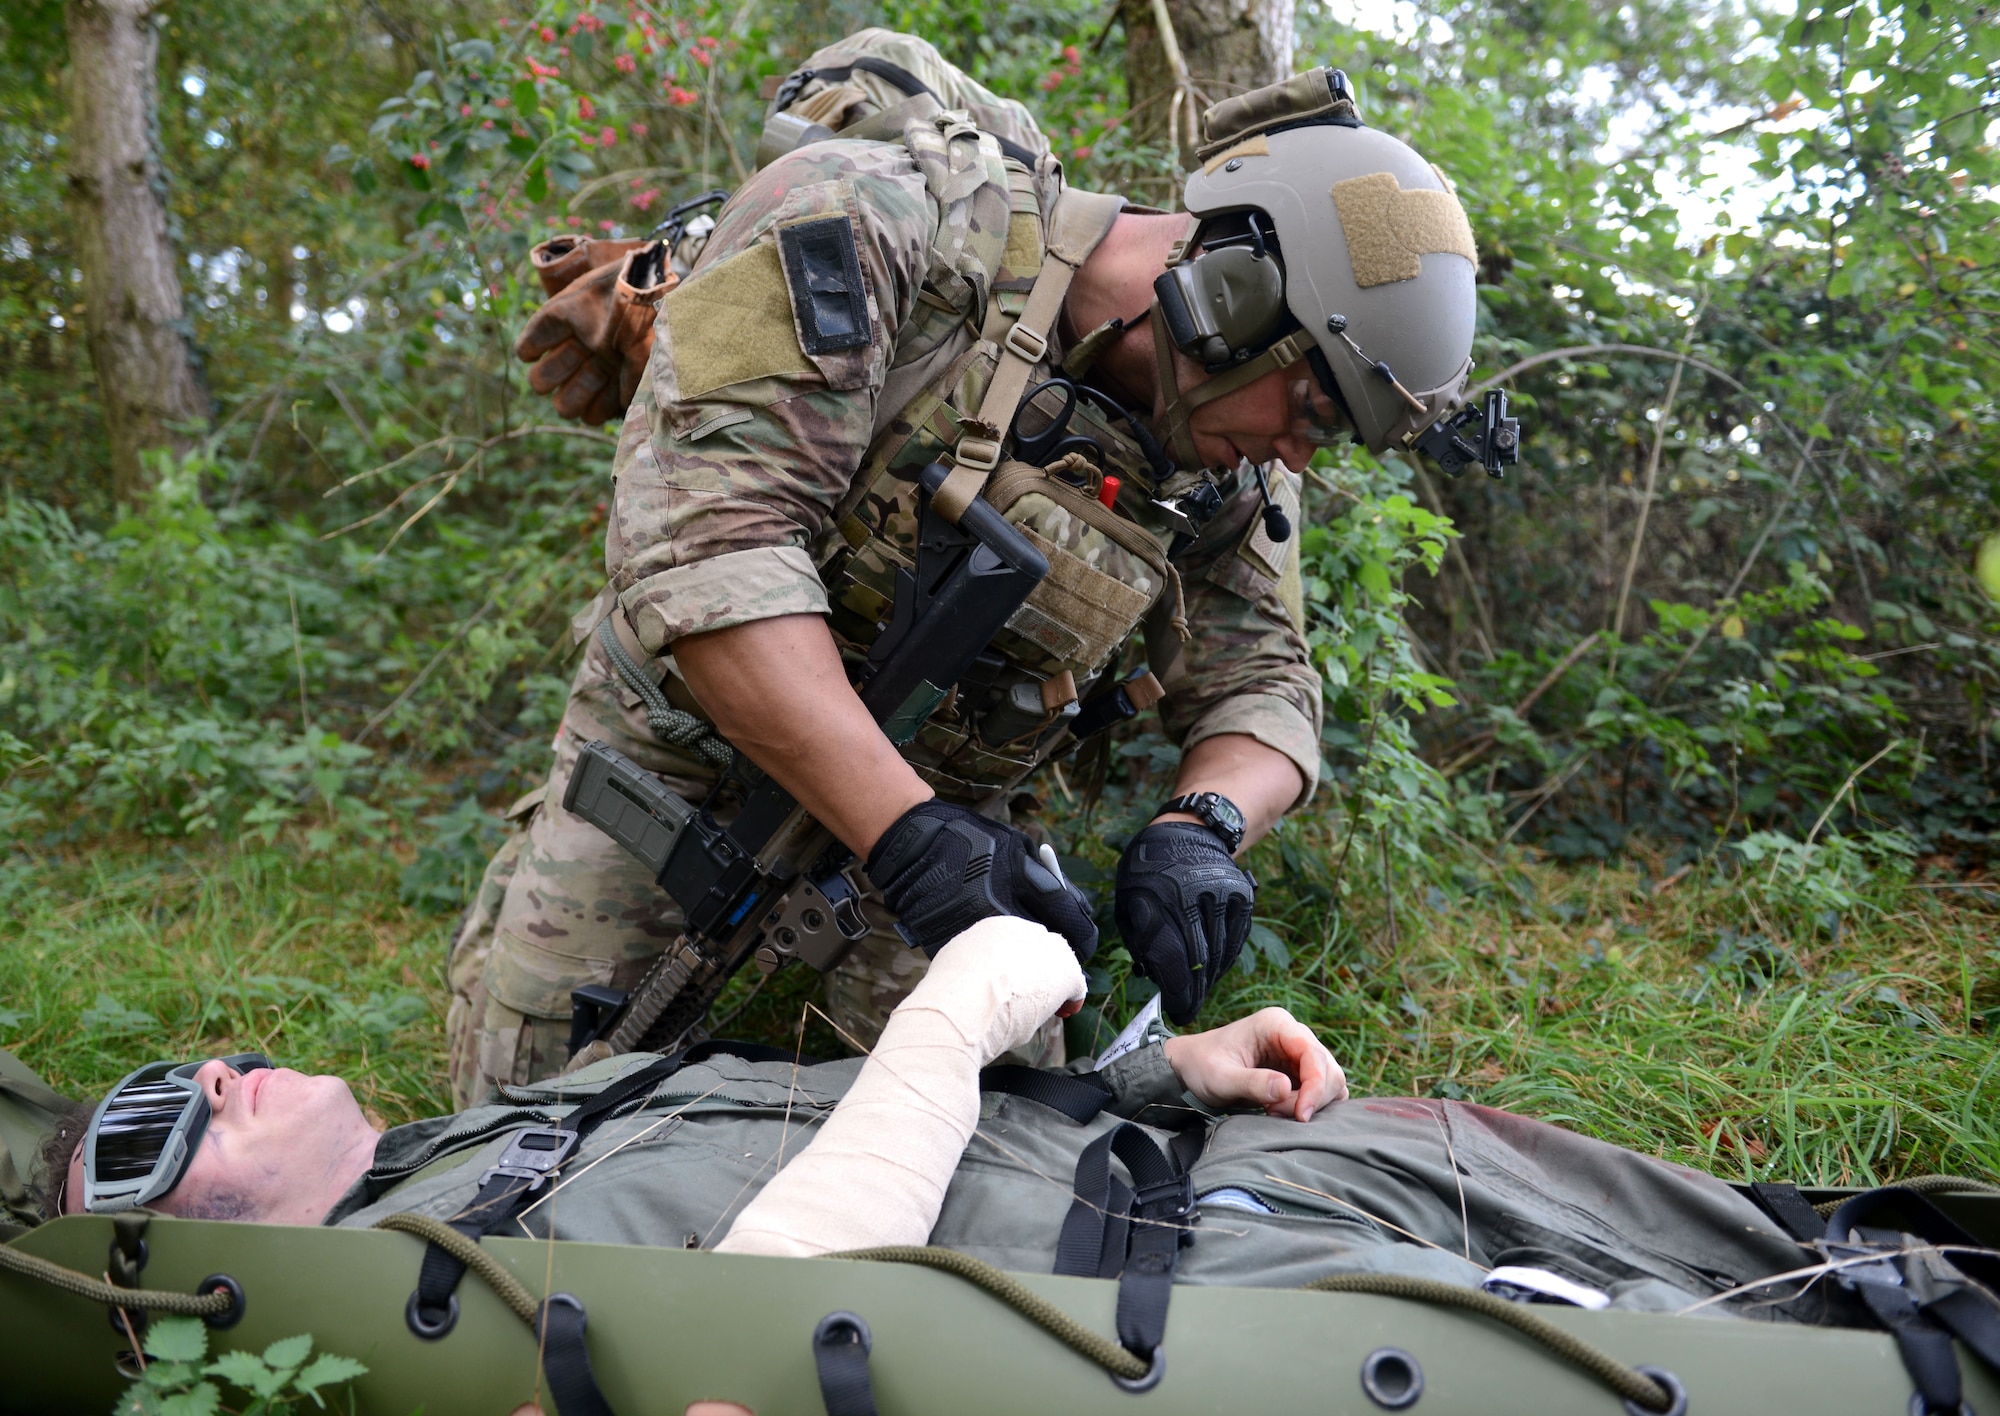 A U.S. Air Force pararecueman helps a simulated victim during a training exercise Oct. 7, 2014, at Stanford Training Area near Thetford, England. Pararescuemen are paramedics who often embed with special operations forces and rescue and recover personnel in hostile environments. The exercise was designed to familiarize special tactics Airmen with combat scenarios preparing them for  real-world incidents. (U.S. Air Force photo/Senior Airman Kate Maurer/Released)